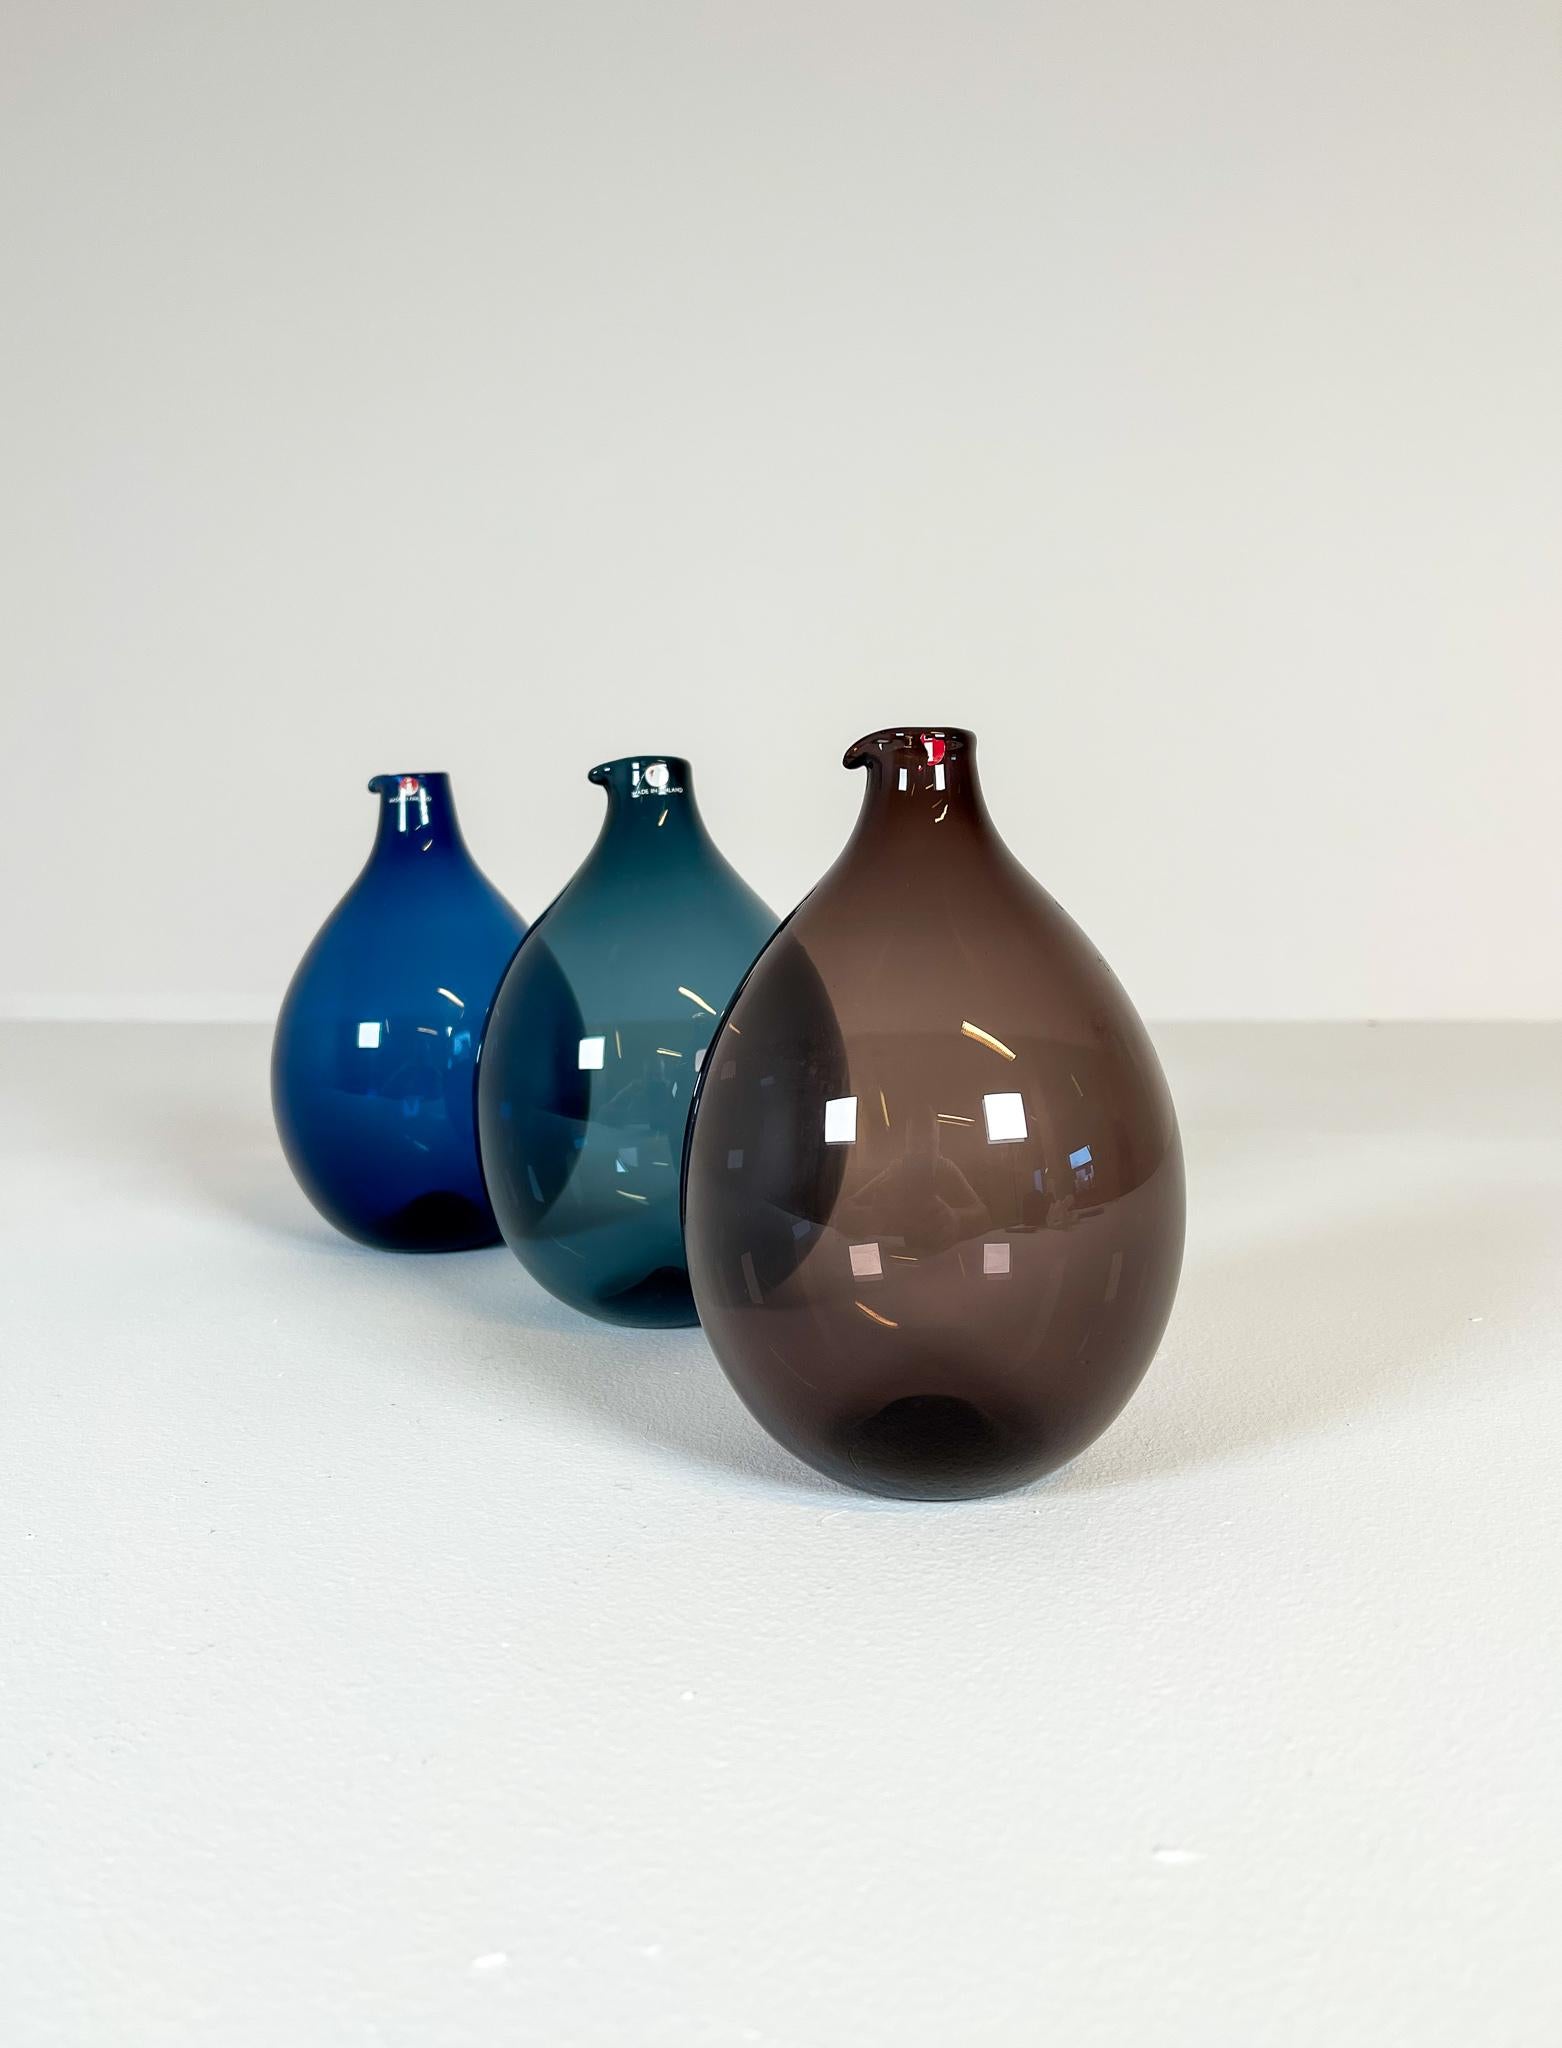 Wonderful sculptured bottled handmade in colored glass. This set in three different colors. 
The bottles were produced by Iittala in 1956-1962 and designed by Timo Sarpaneva. 

Fully signed in the bottom of them. 

Measures H 16 cm, D 12 cm.